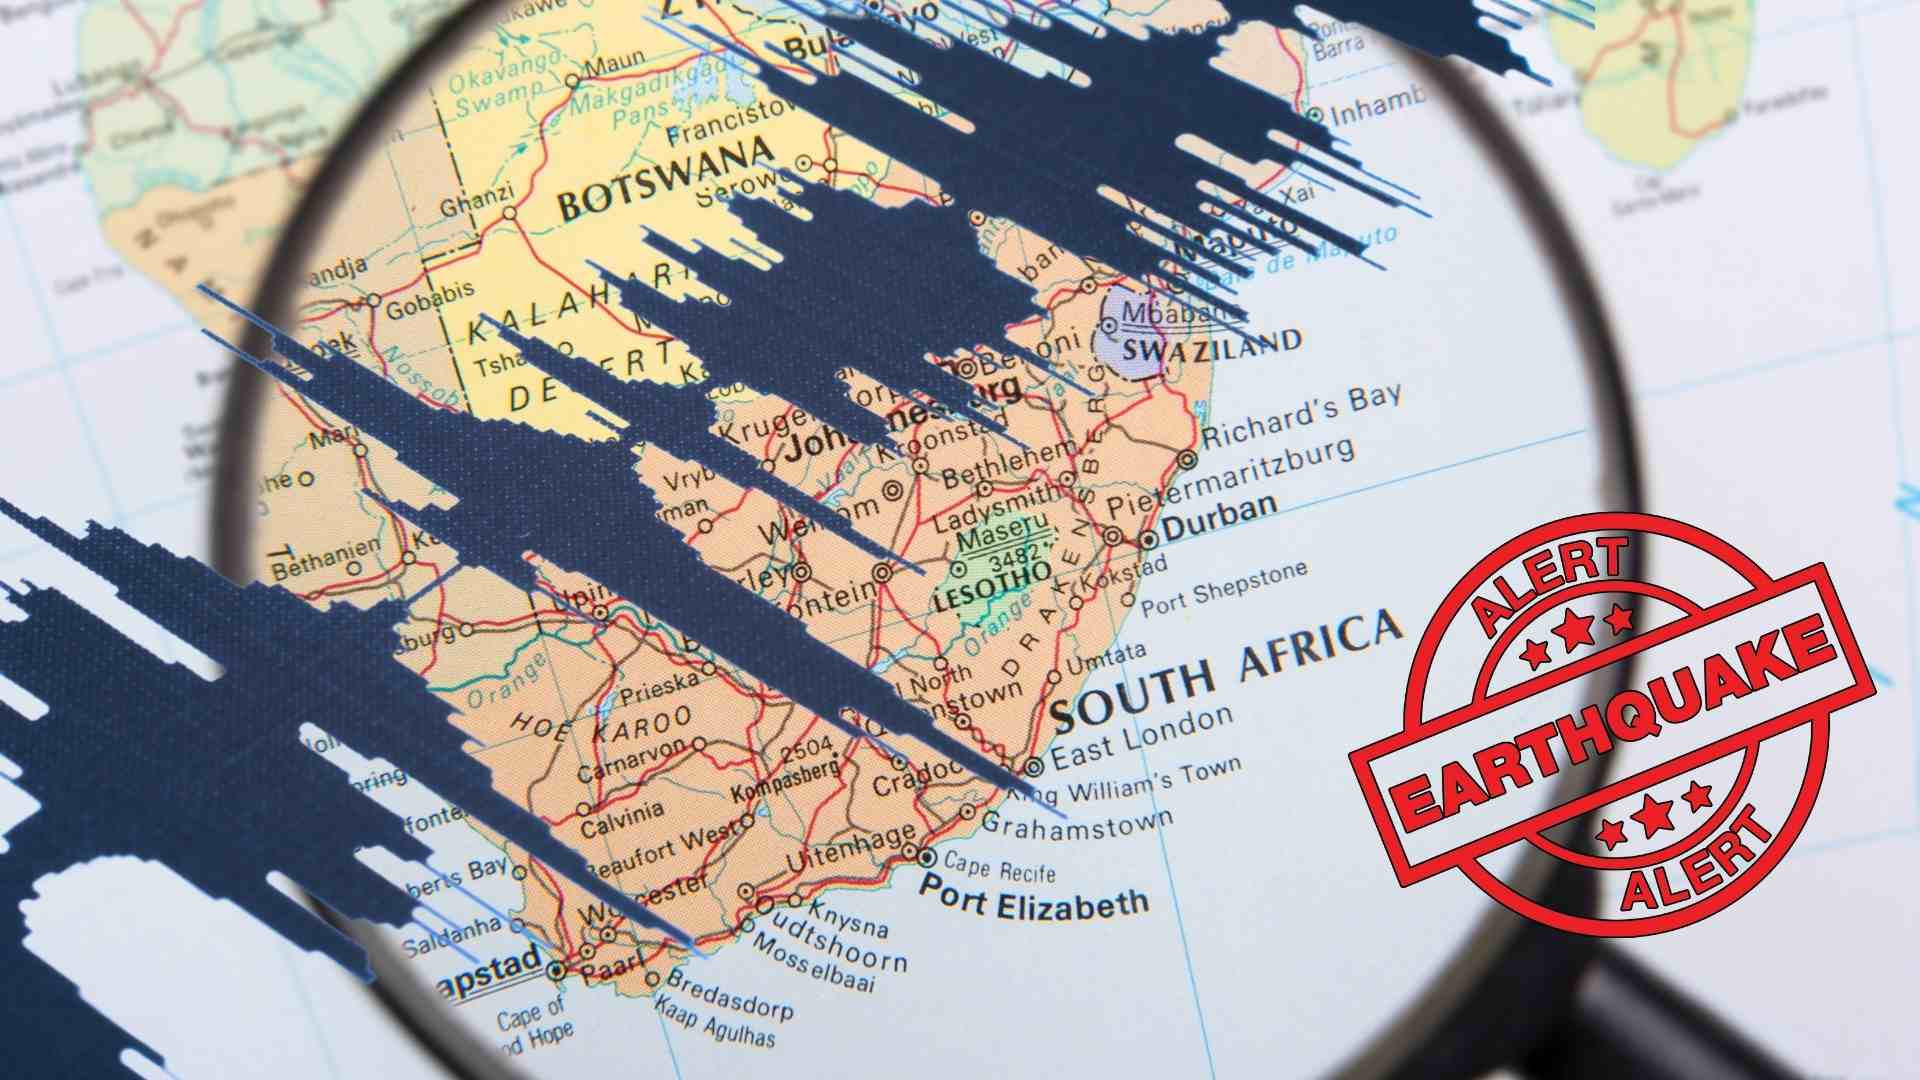 Magnitude of 5.0 earthquake struck Johannesburg, South African